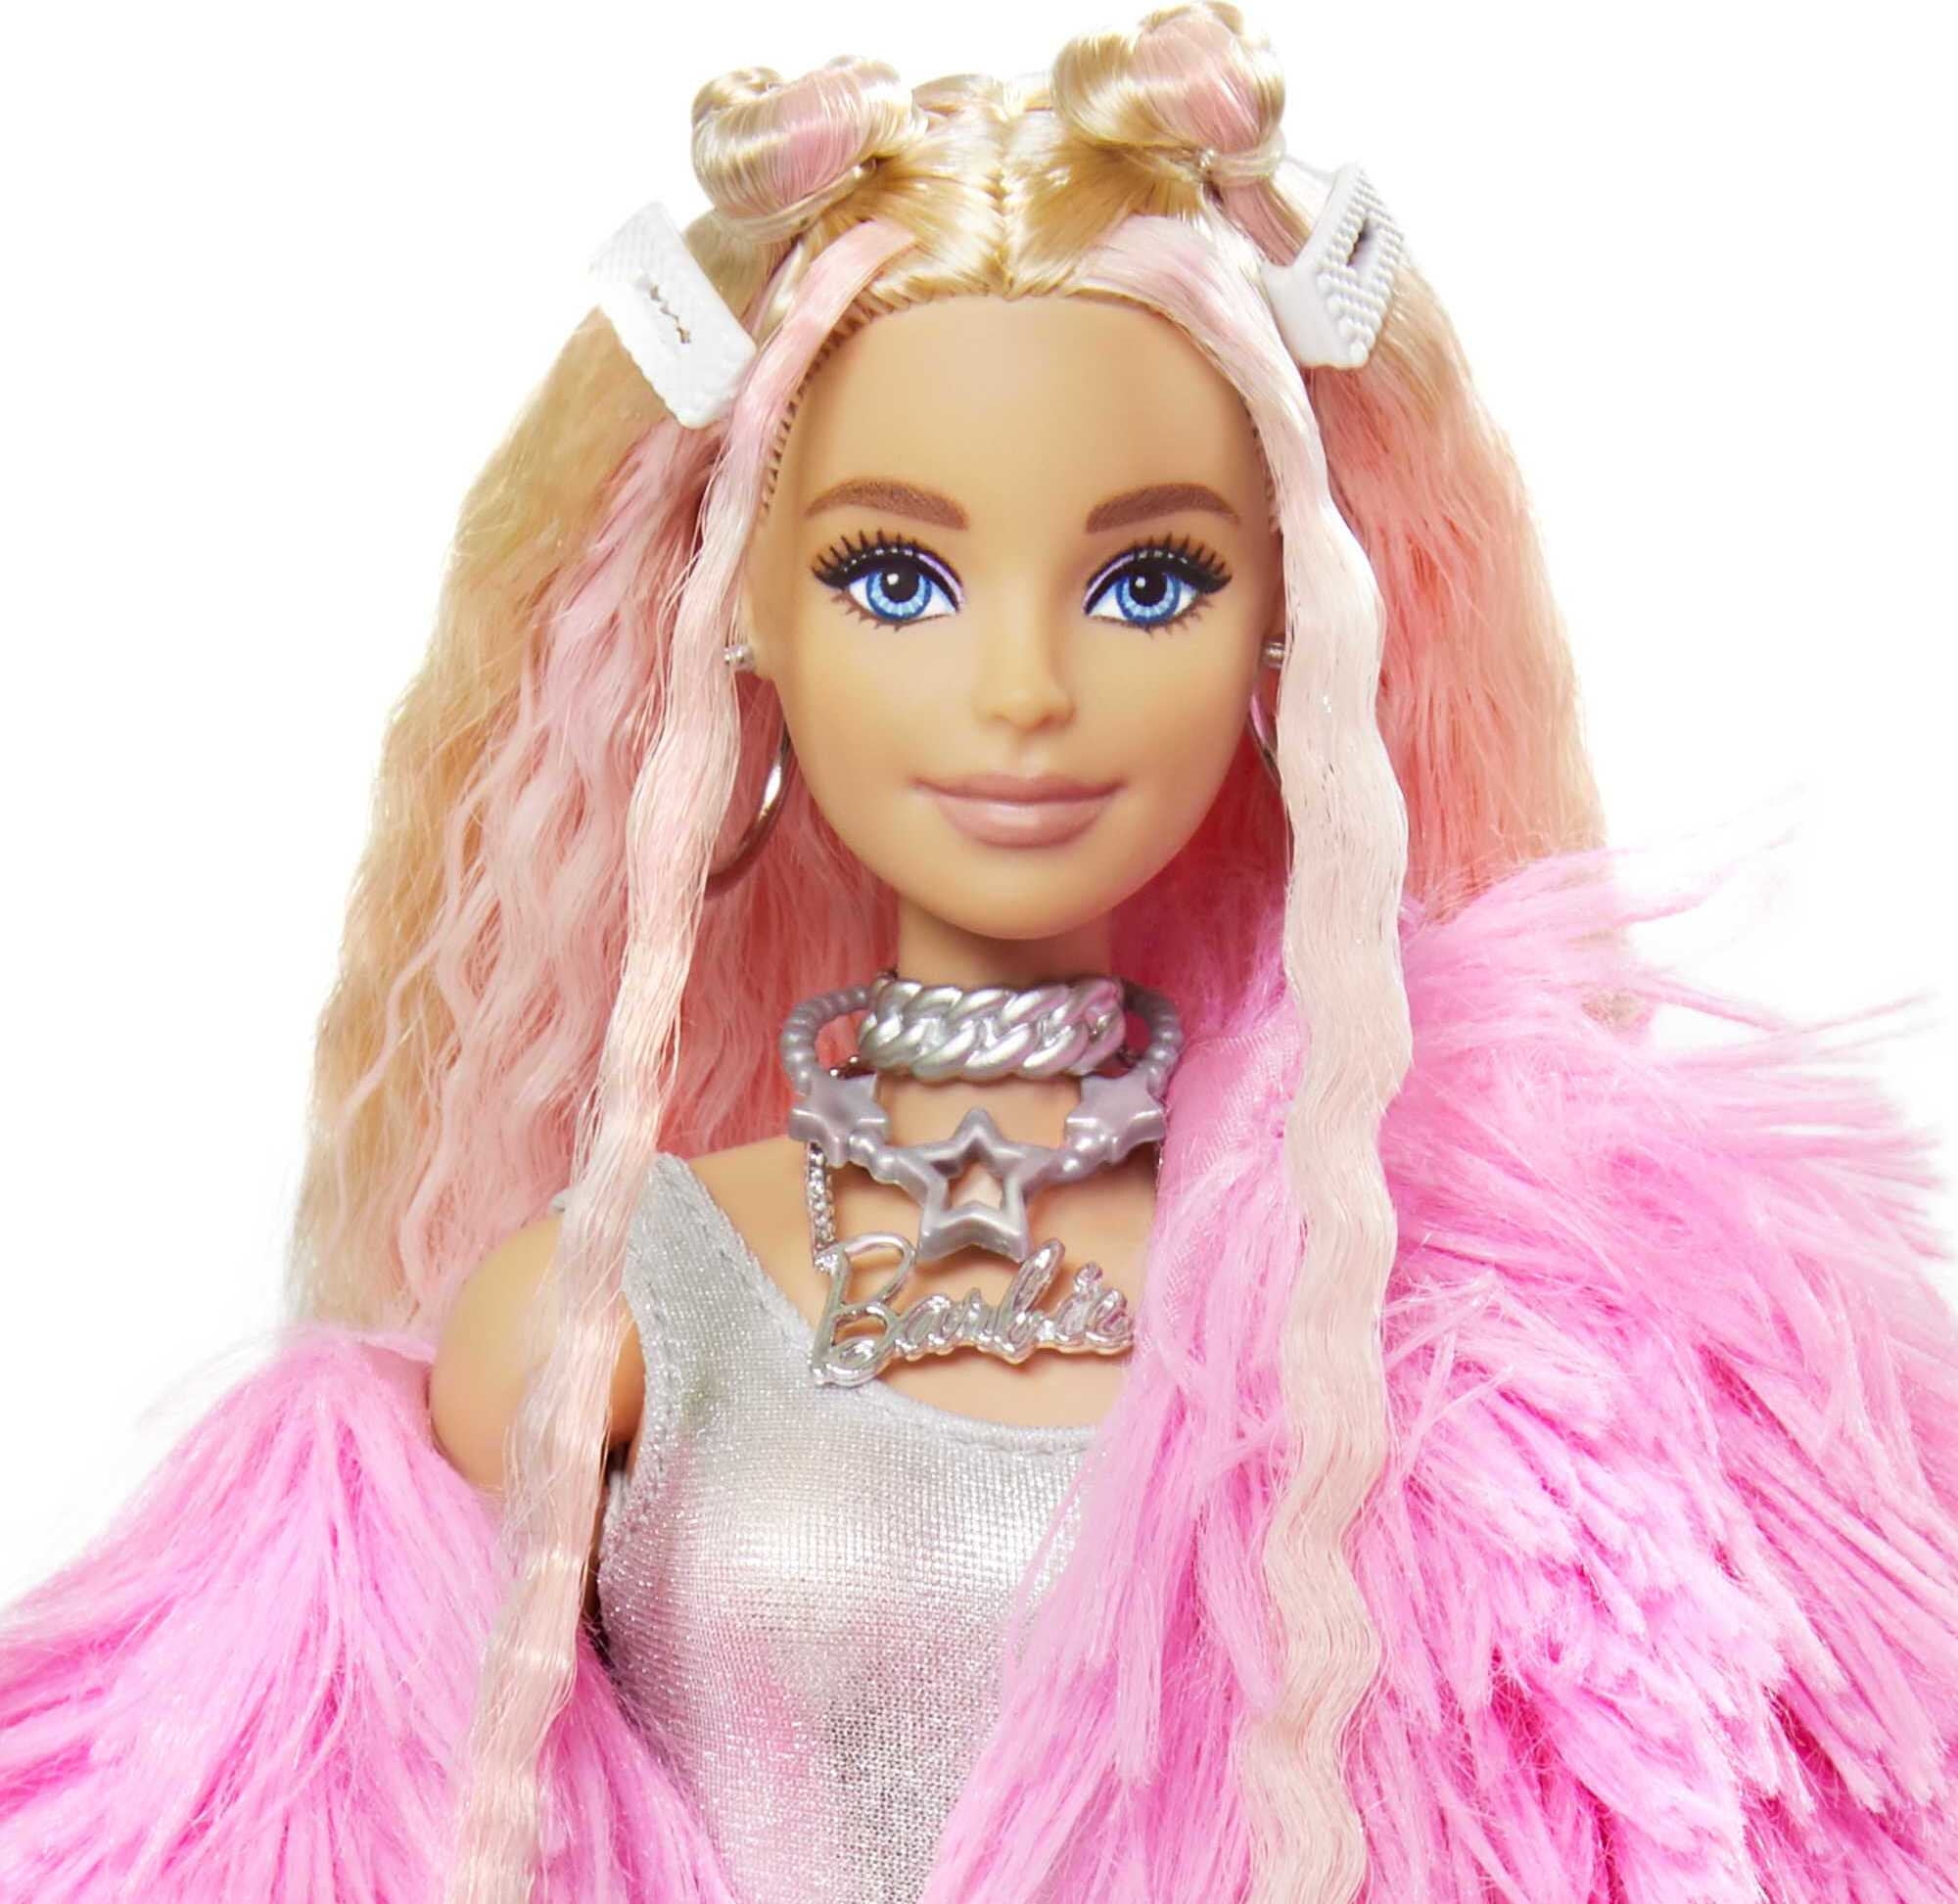 Barbie Extra Fashion Doll with Crimped Hair in Fluffy Pink Coat